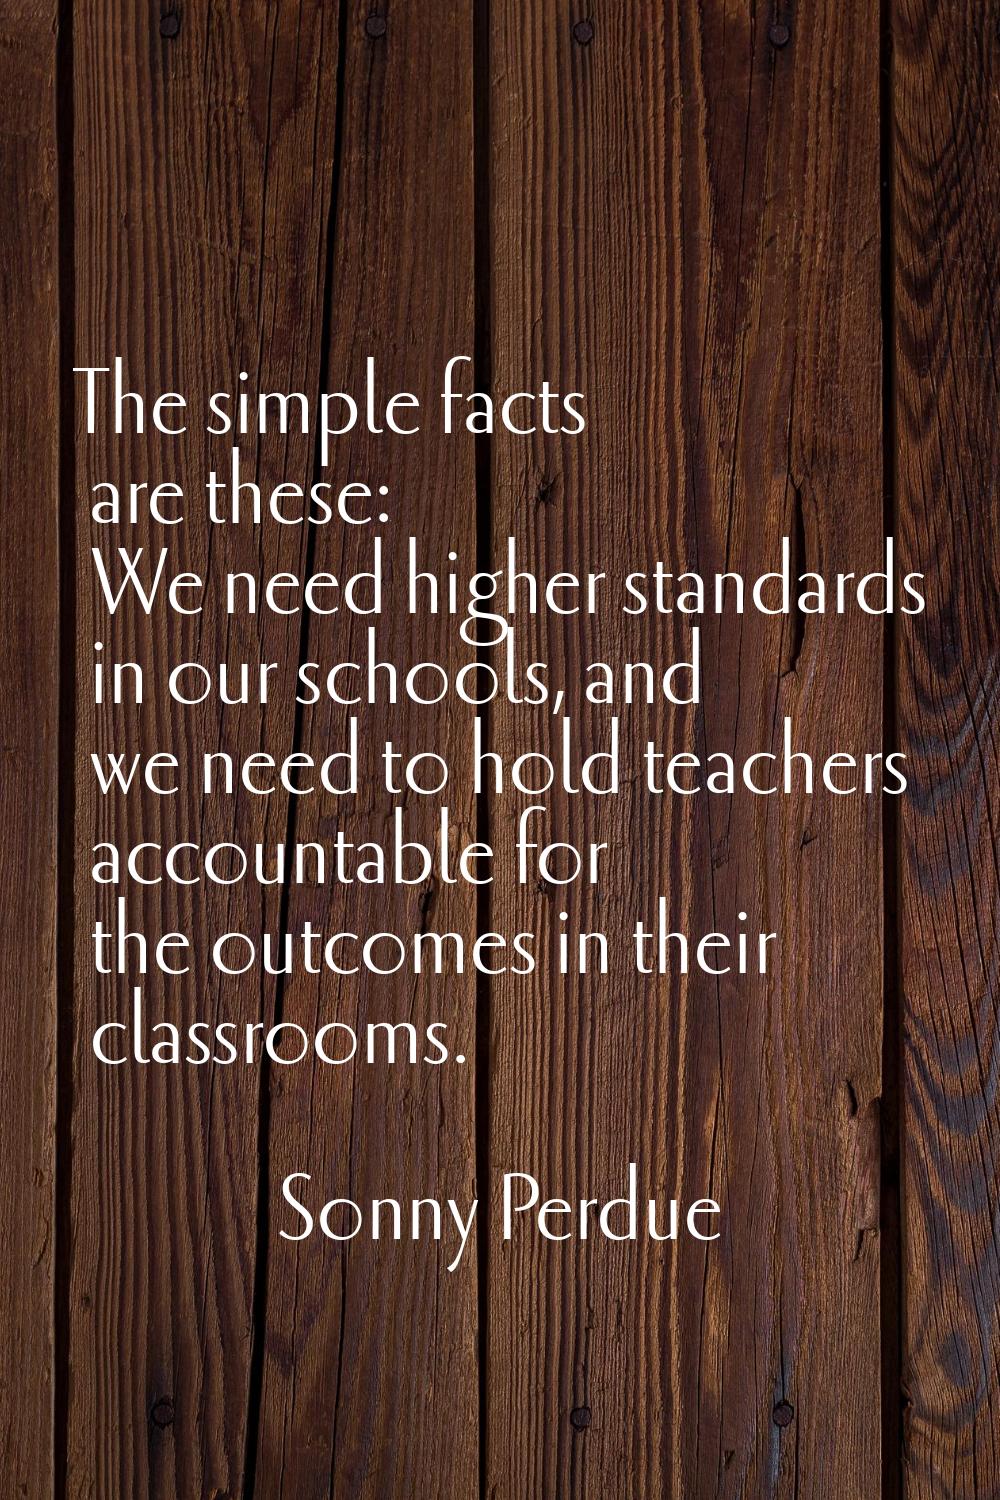 The simple facts are these: We need higher standards in our schools, and we need to hold teachers a